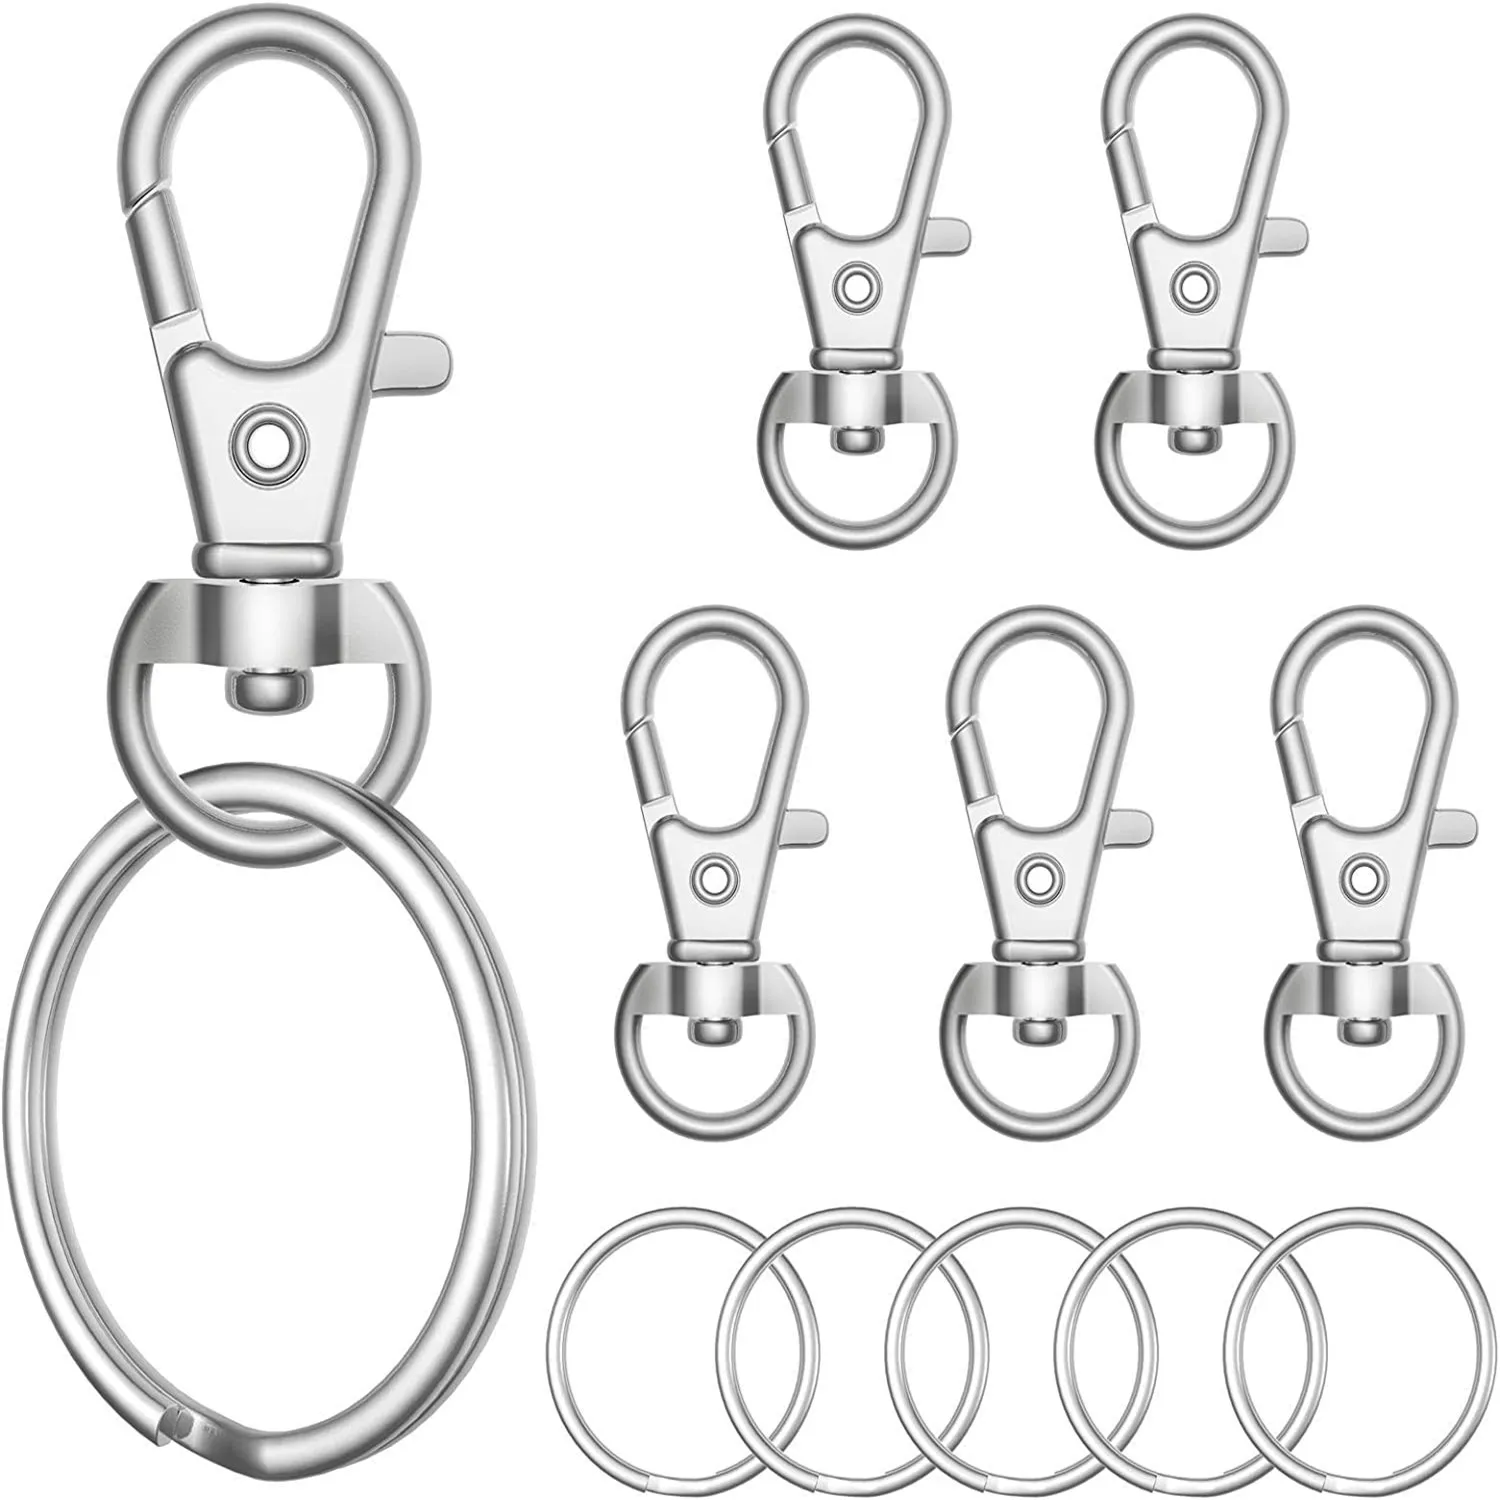 

10PCS/5Set Swivel Clasps Lanyard Snap Hooks with Key Rings, Key Chain Clip Hooks Lobster Claw Clasps for Keychains DIY Crafts